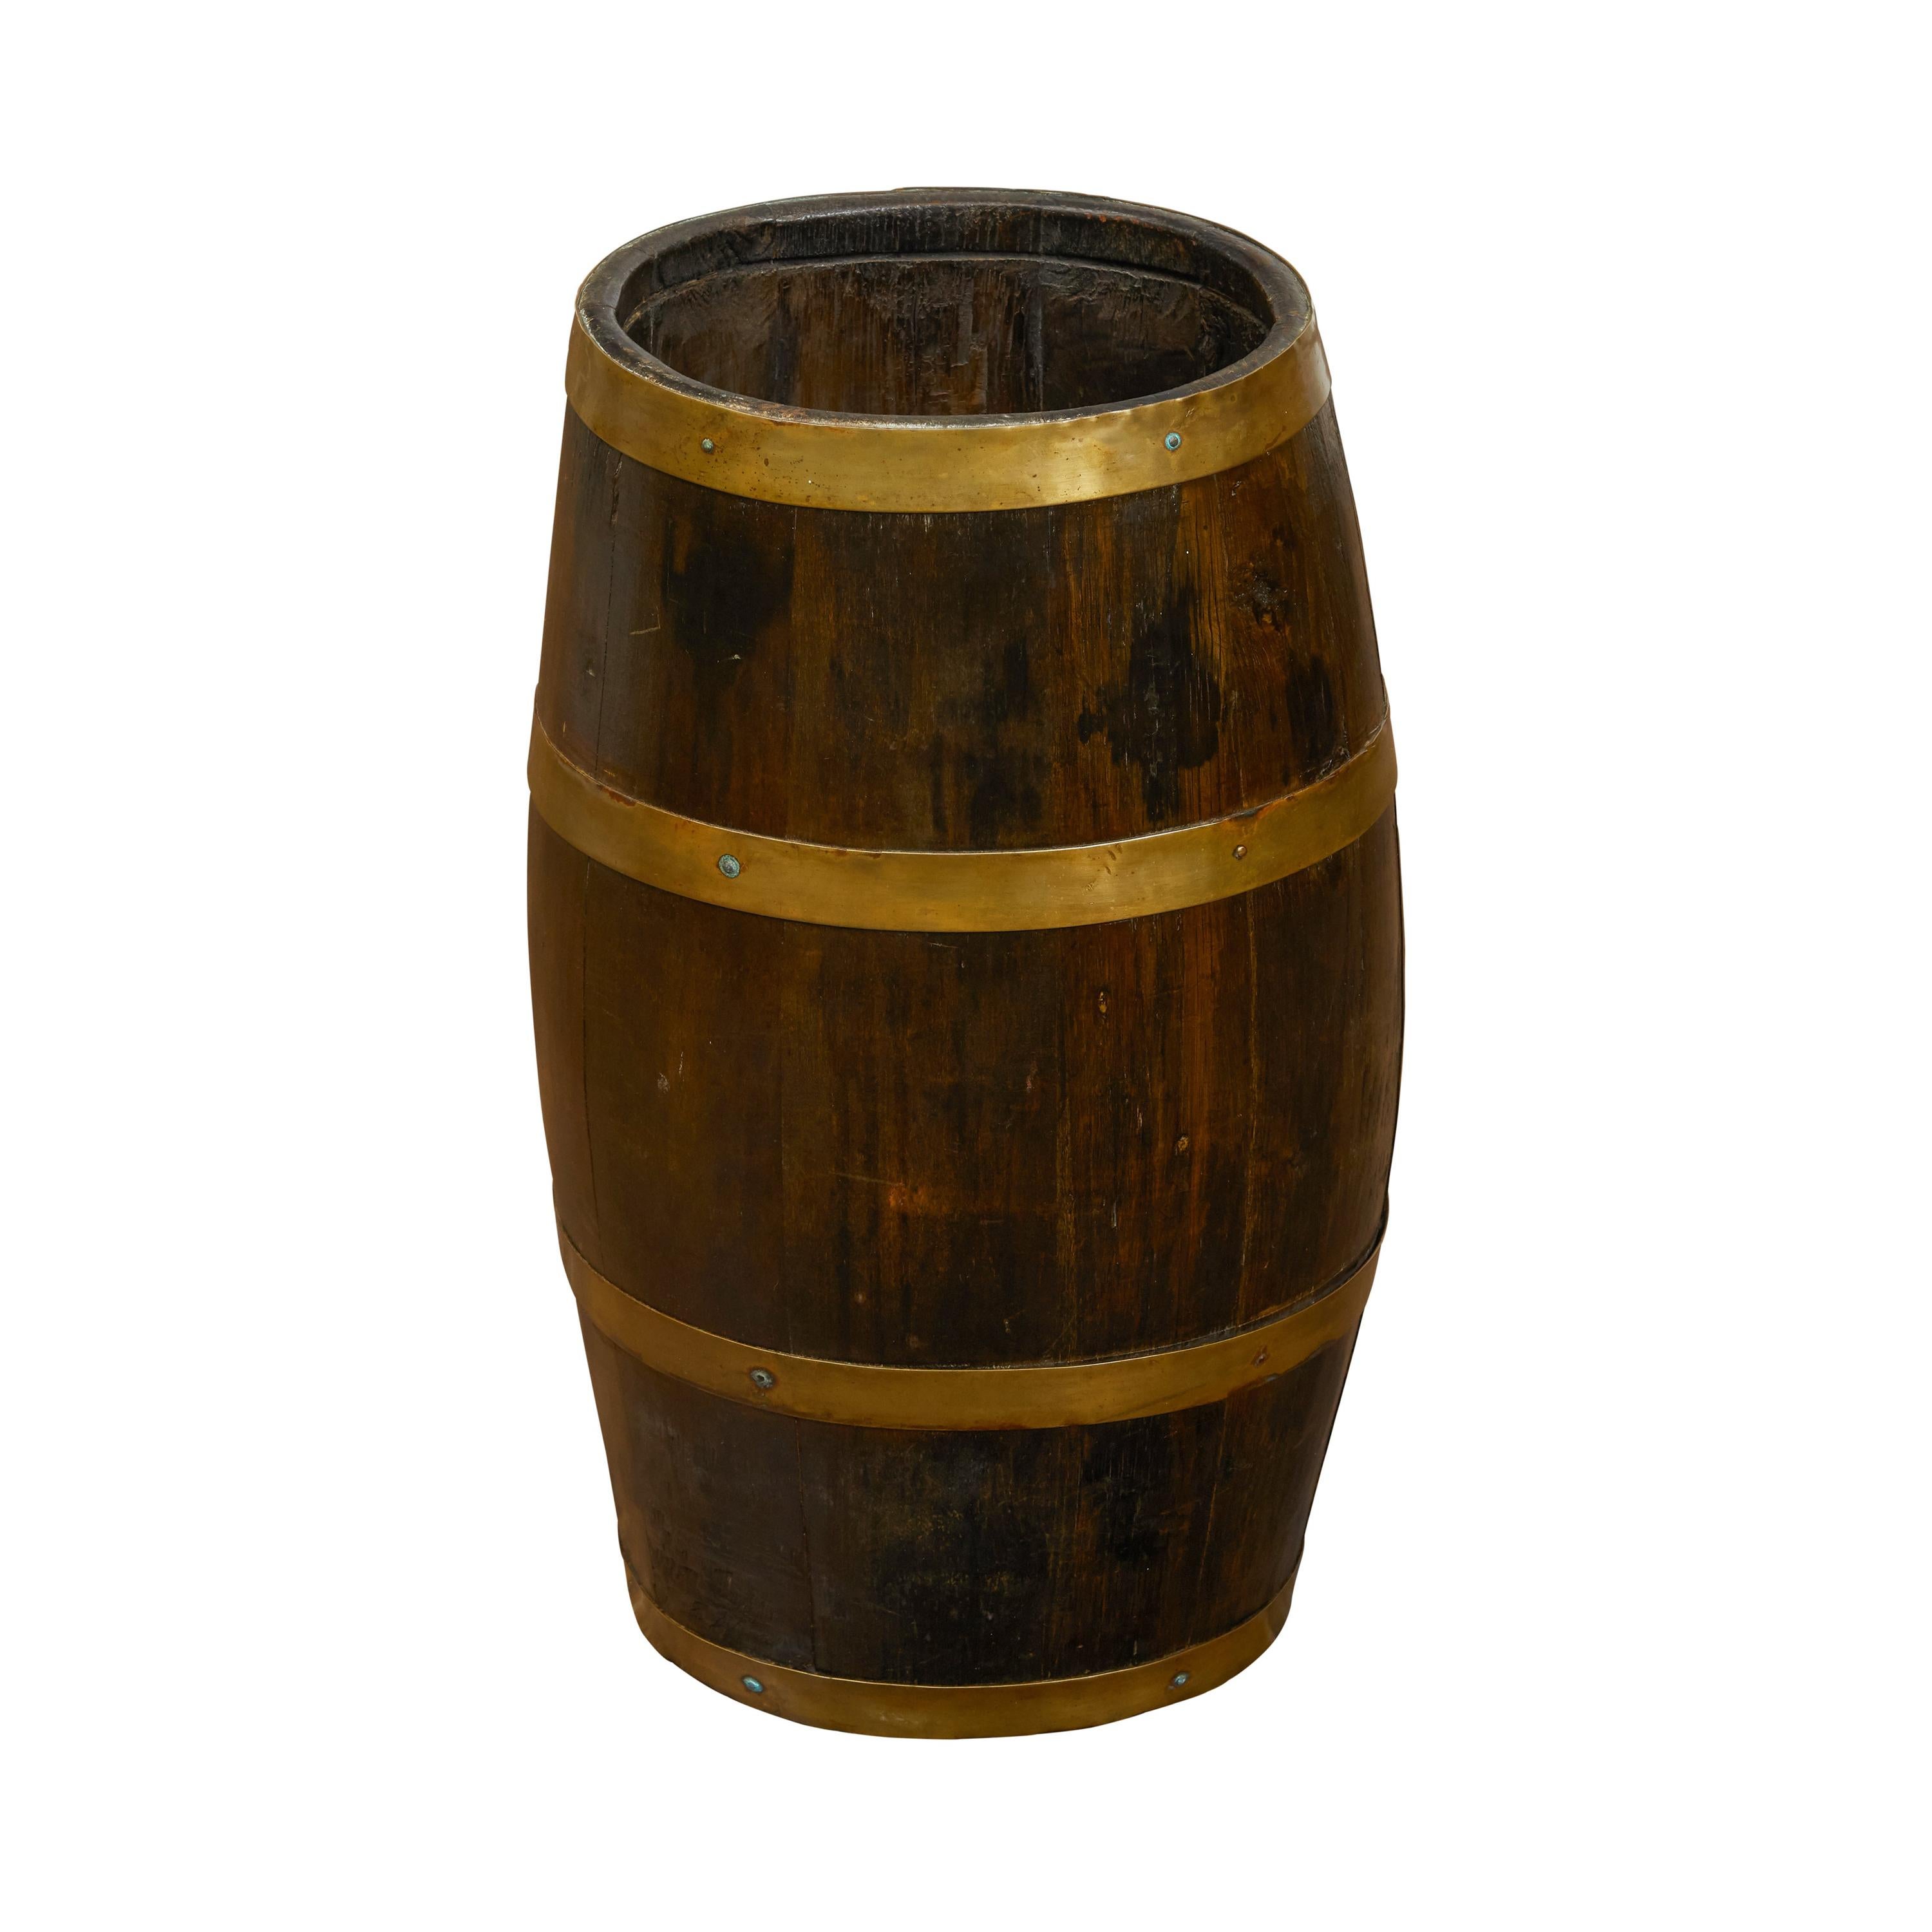 English Turn of the Century Oak Barrel with Brass Braces, circa 1900 For Sale